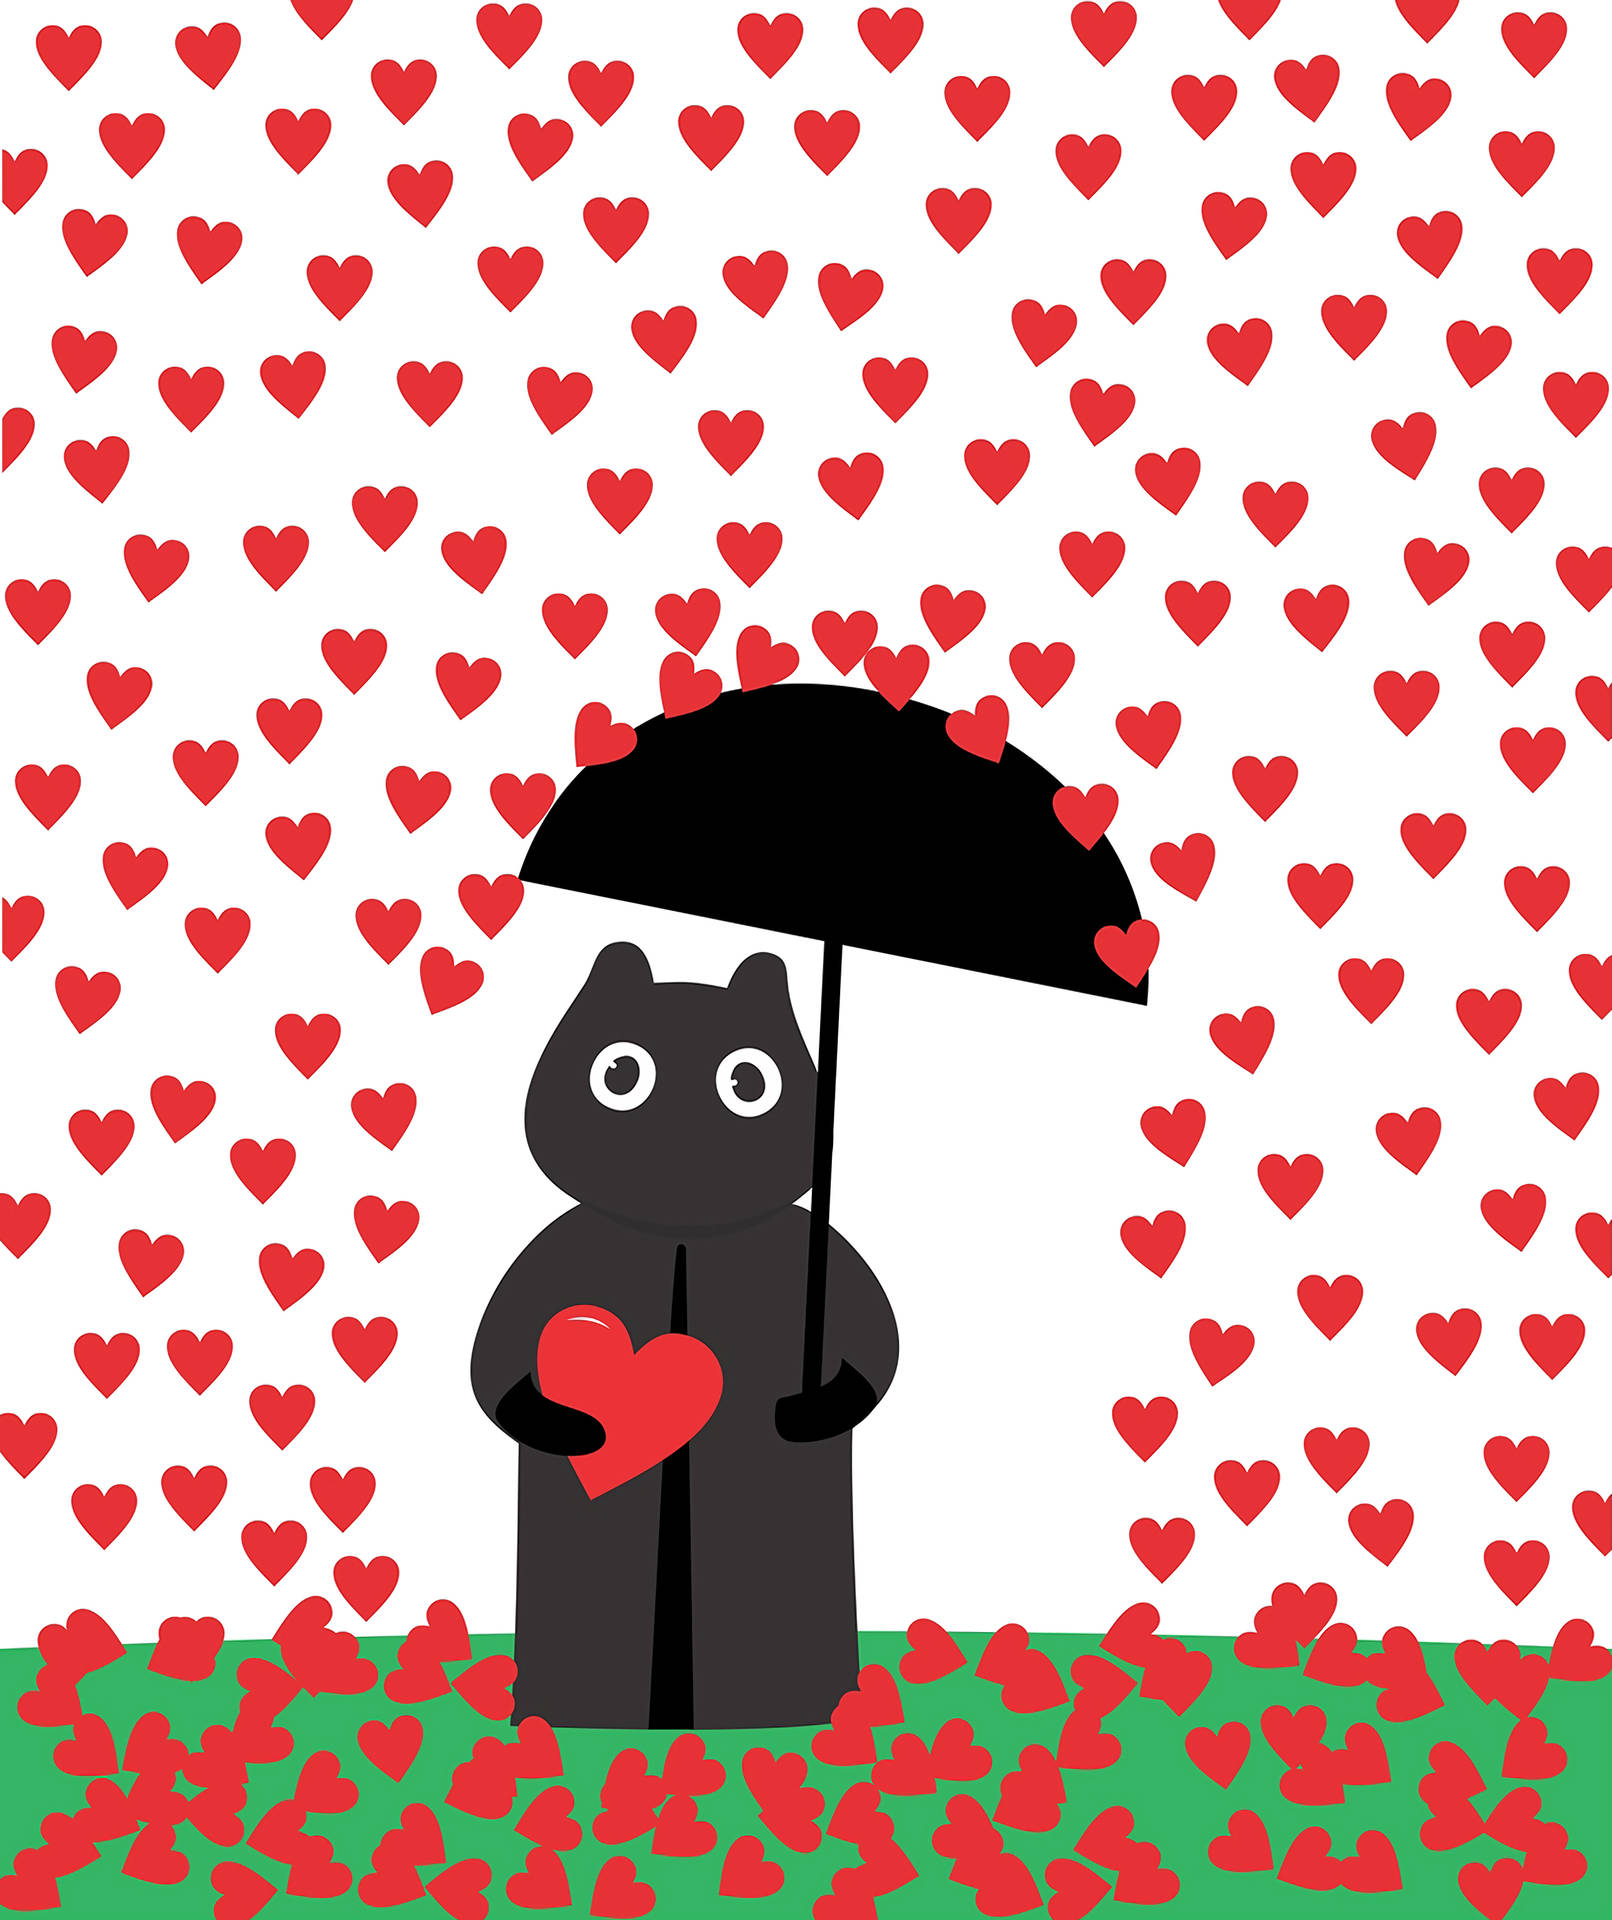 A Black Cat Holding An Umbrella In A Field Of Hearts Background